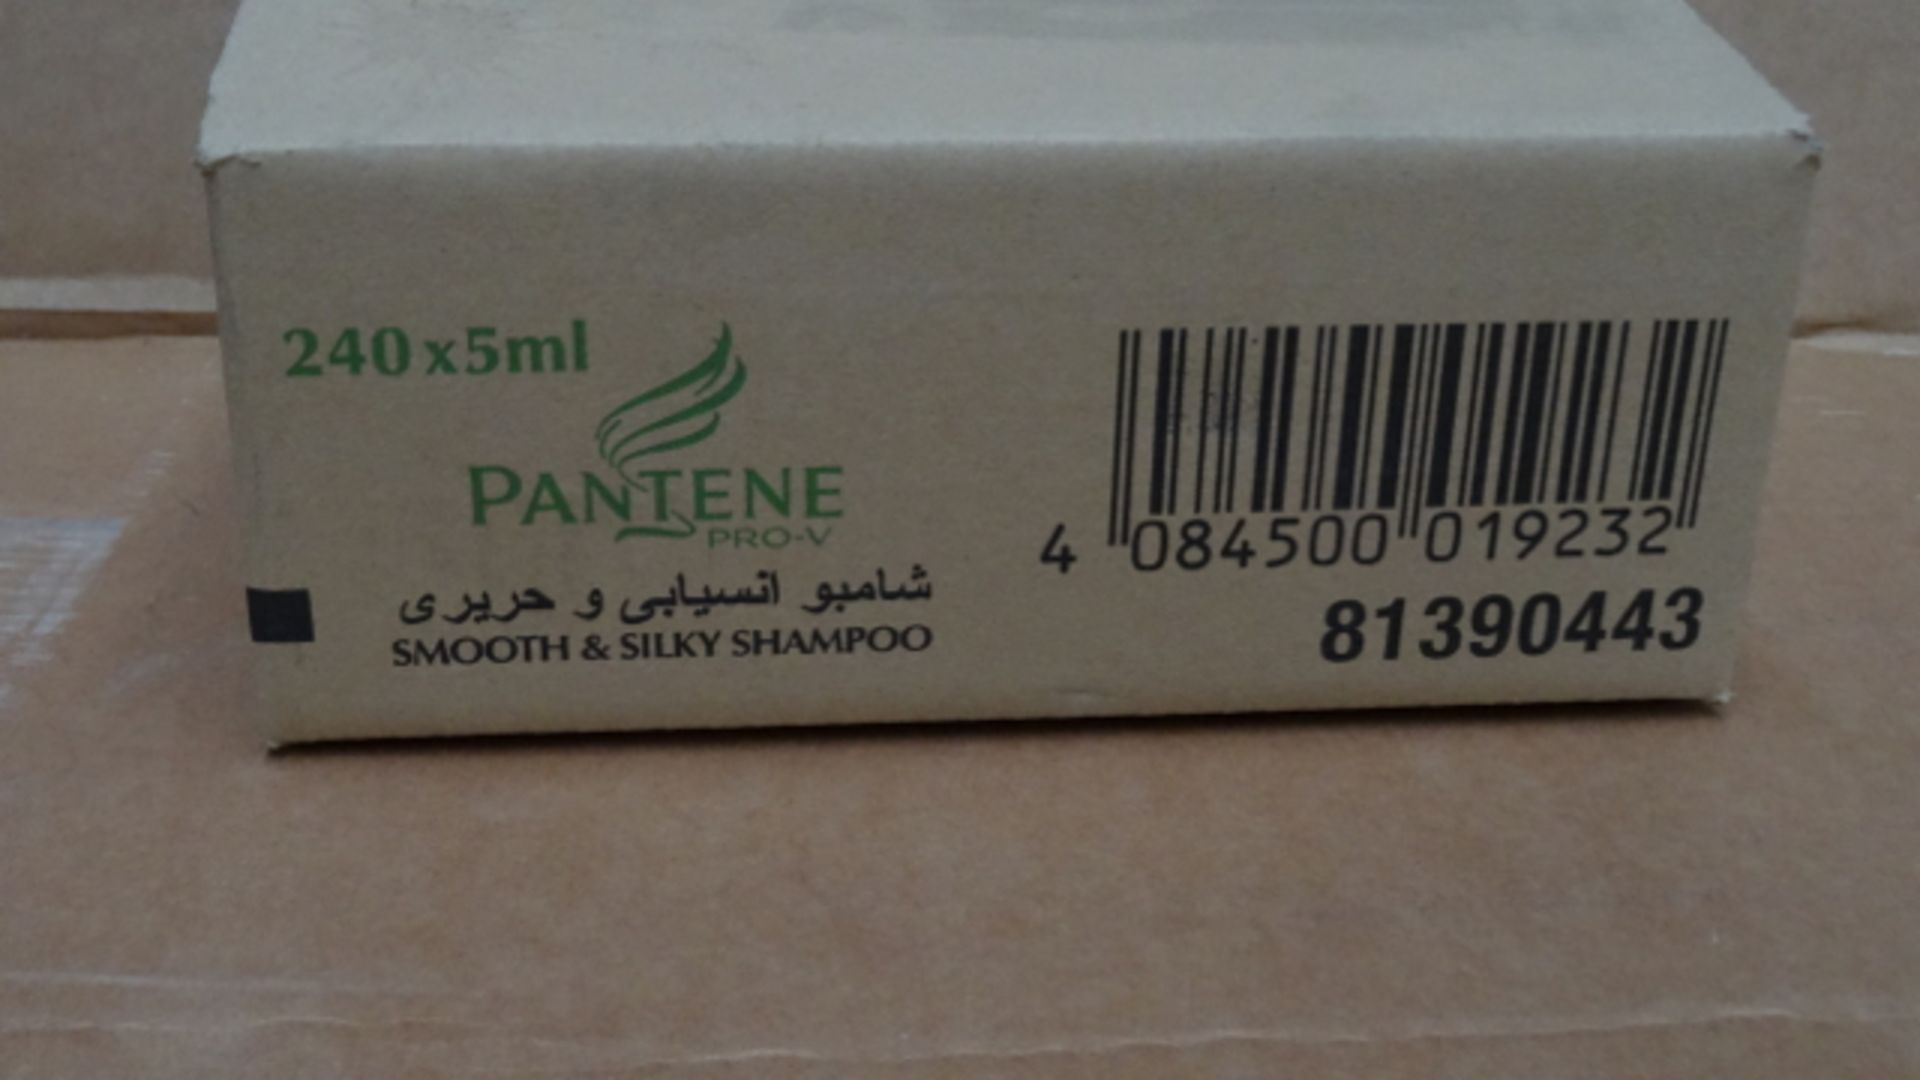 960 x Pantene Pro-V Smooth and Silky Shampoo. Moisturizes dry hair leaving it strong. 5ML Sachets. - Image 2 of 3